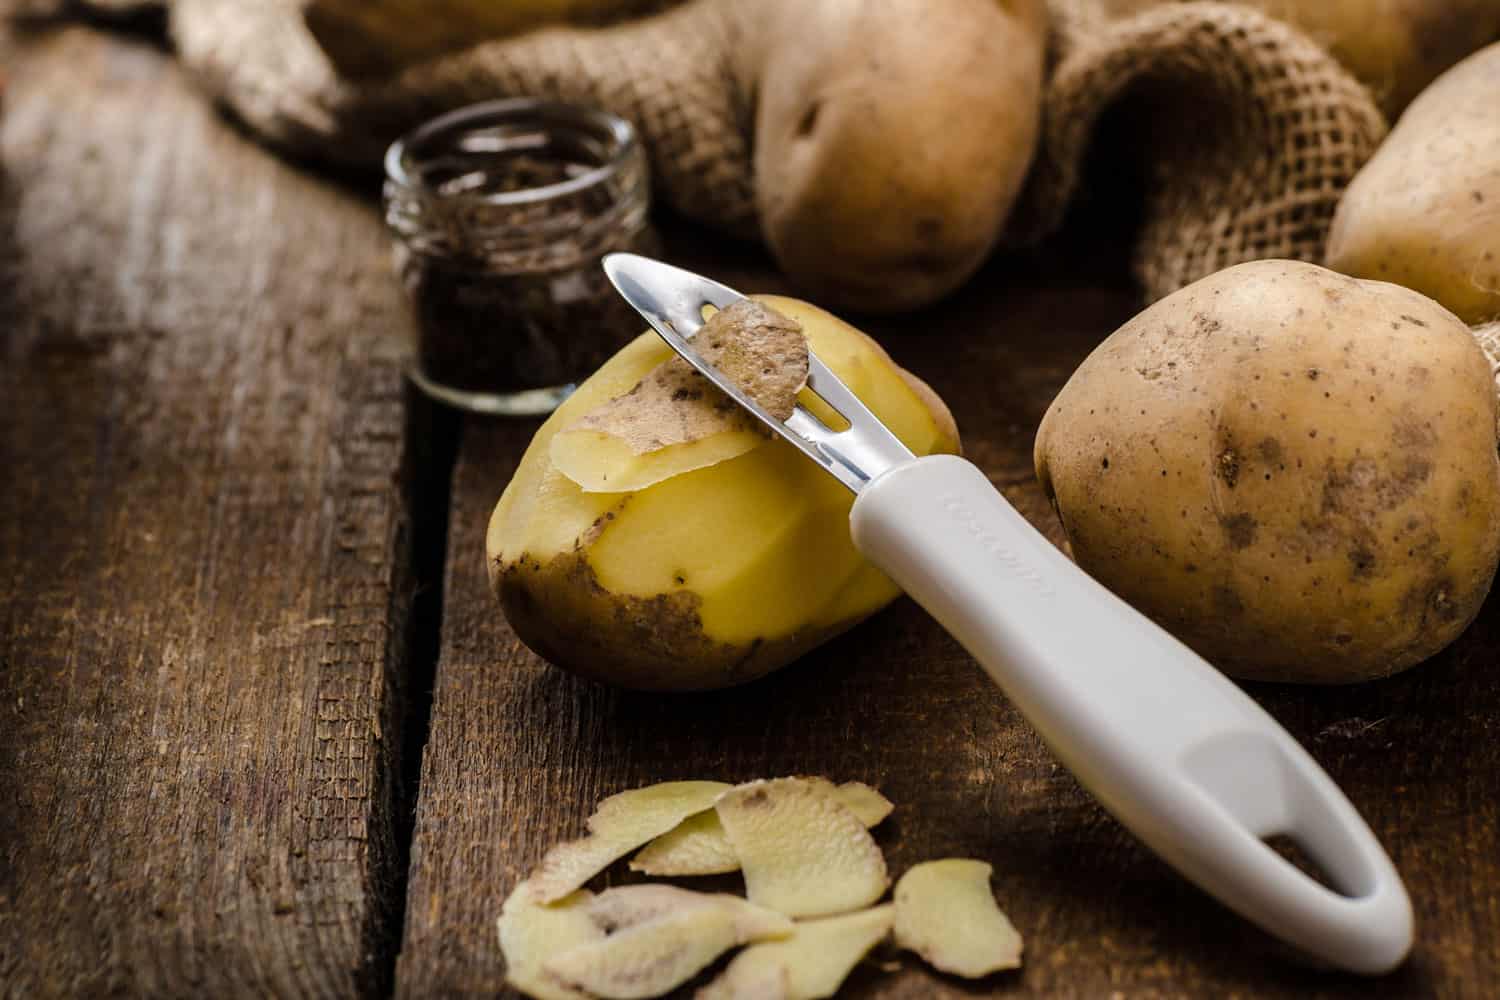 A peeled potato with a potato peeler on it and unpeeled potatoes on the background